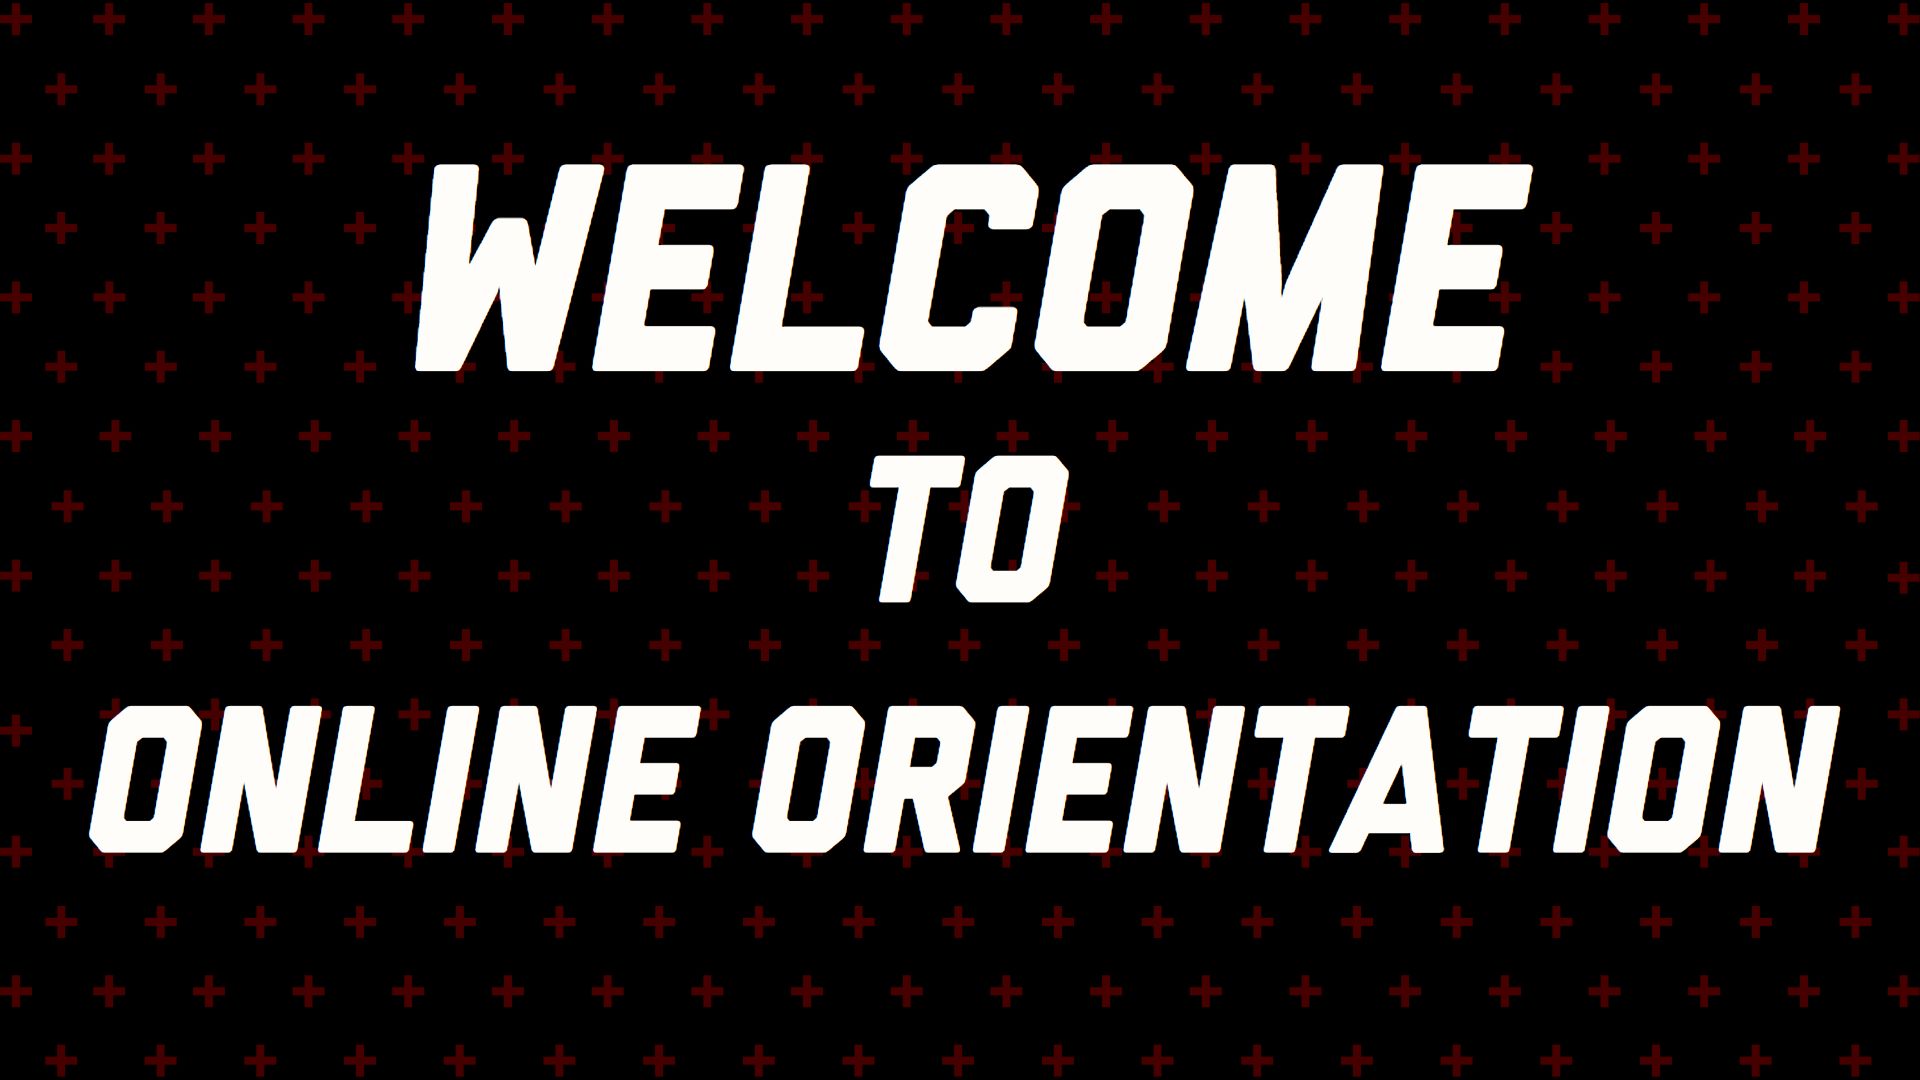 Transfer Online Orientation Welcome Video